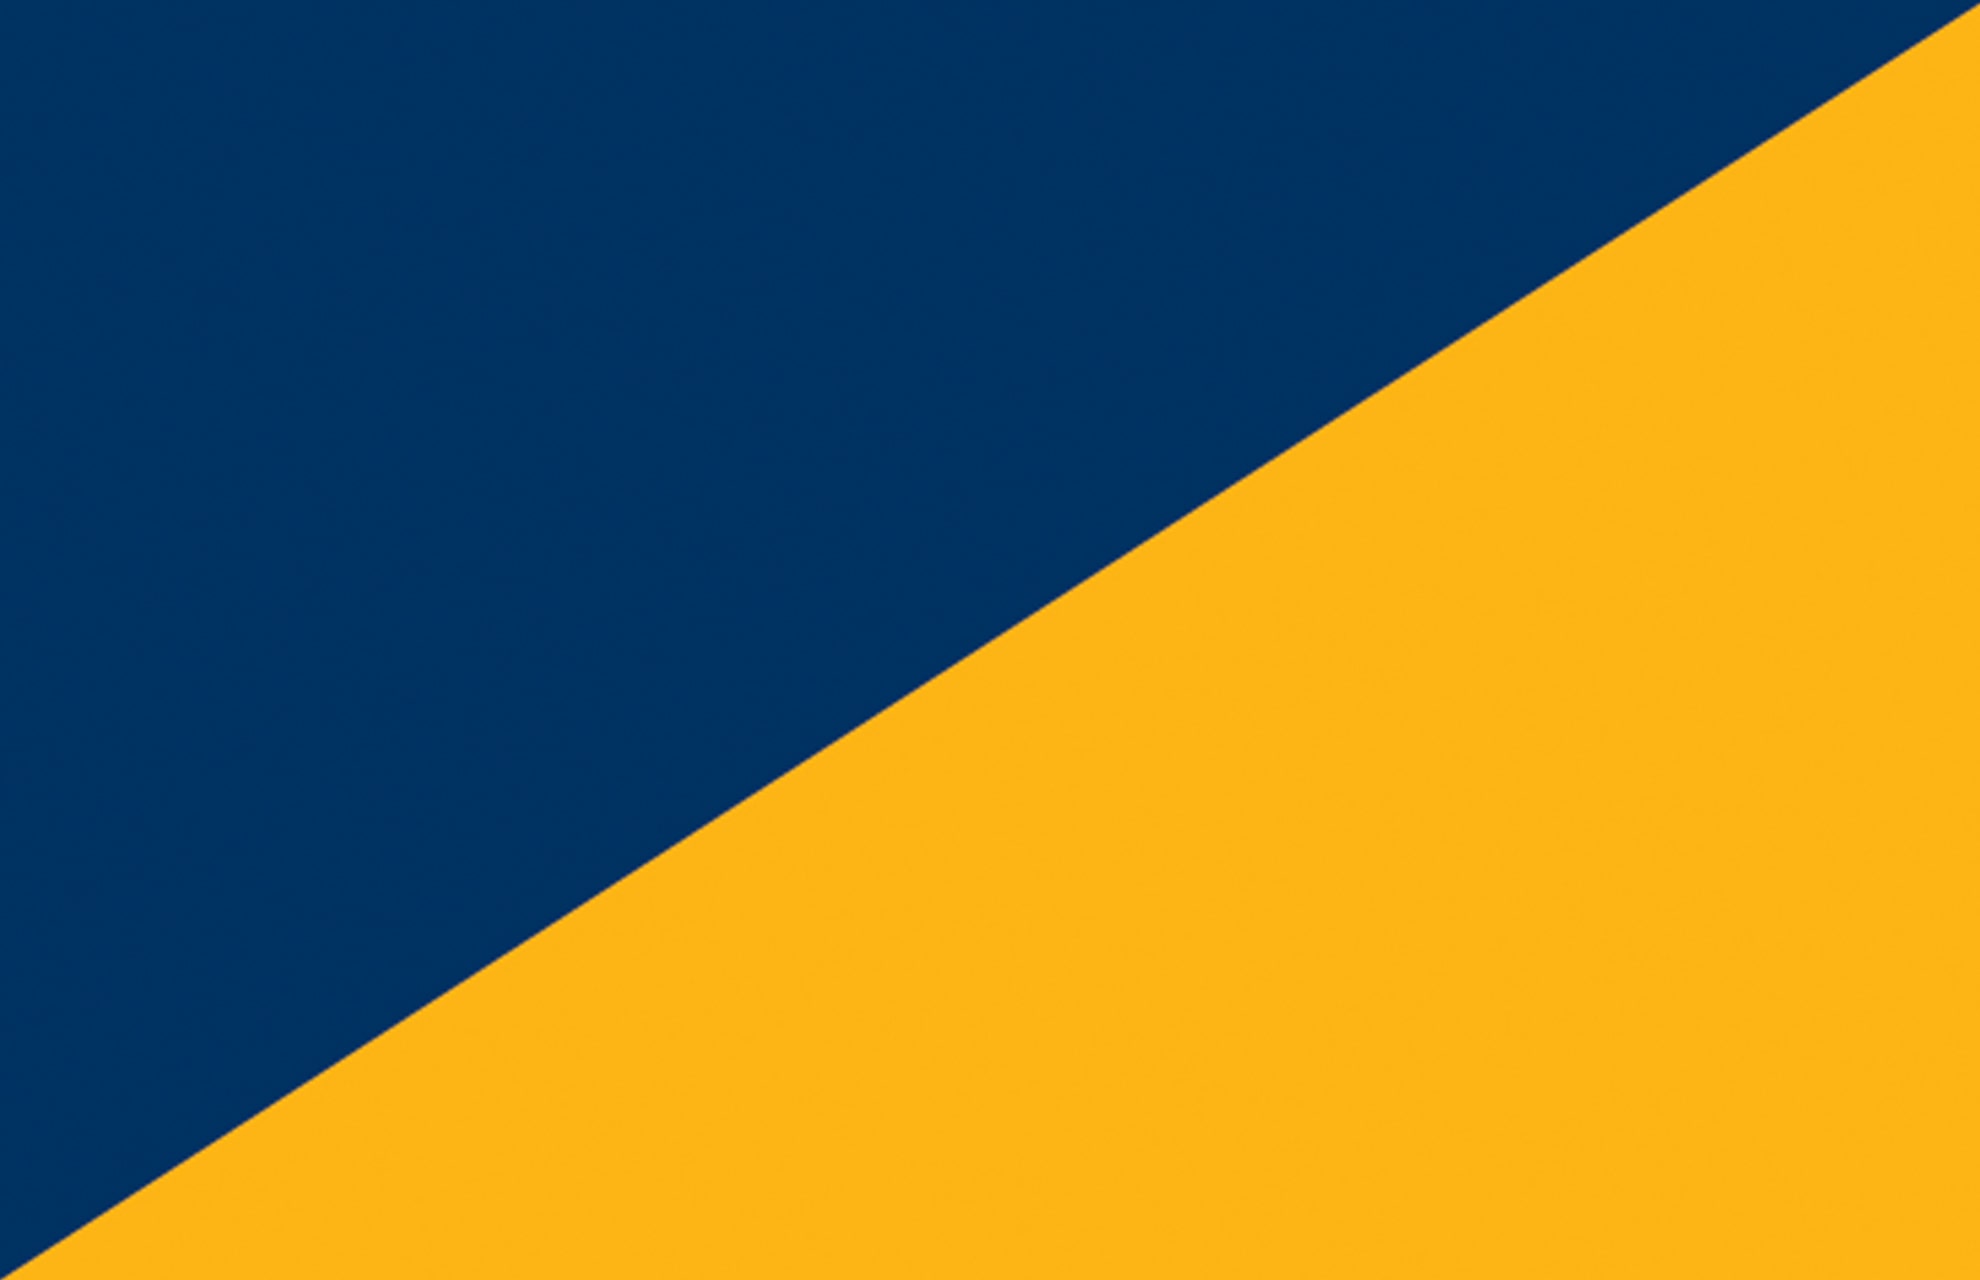 State Colors - Blue and Gold